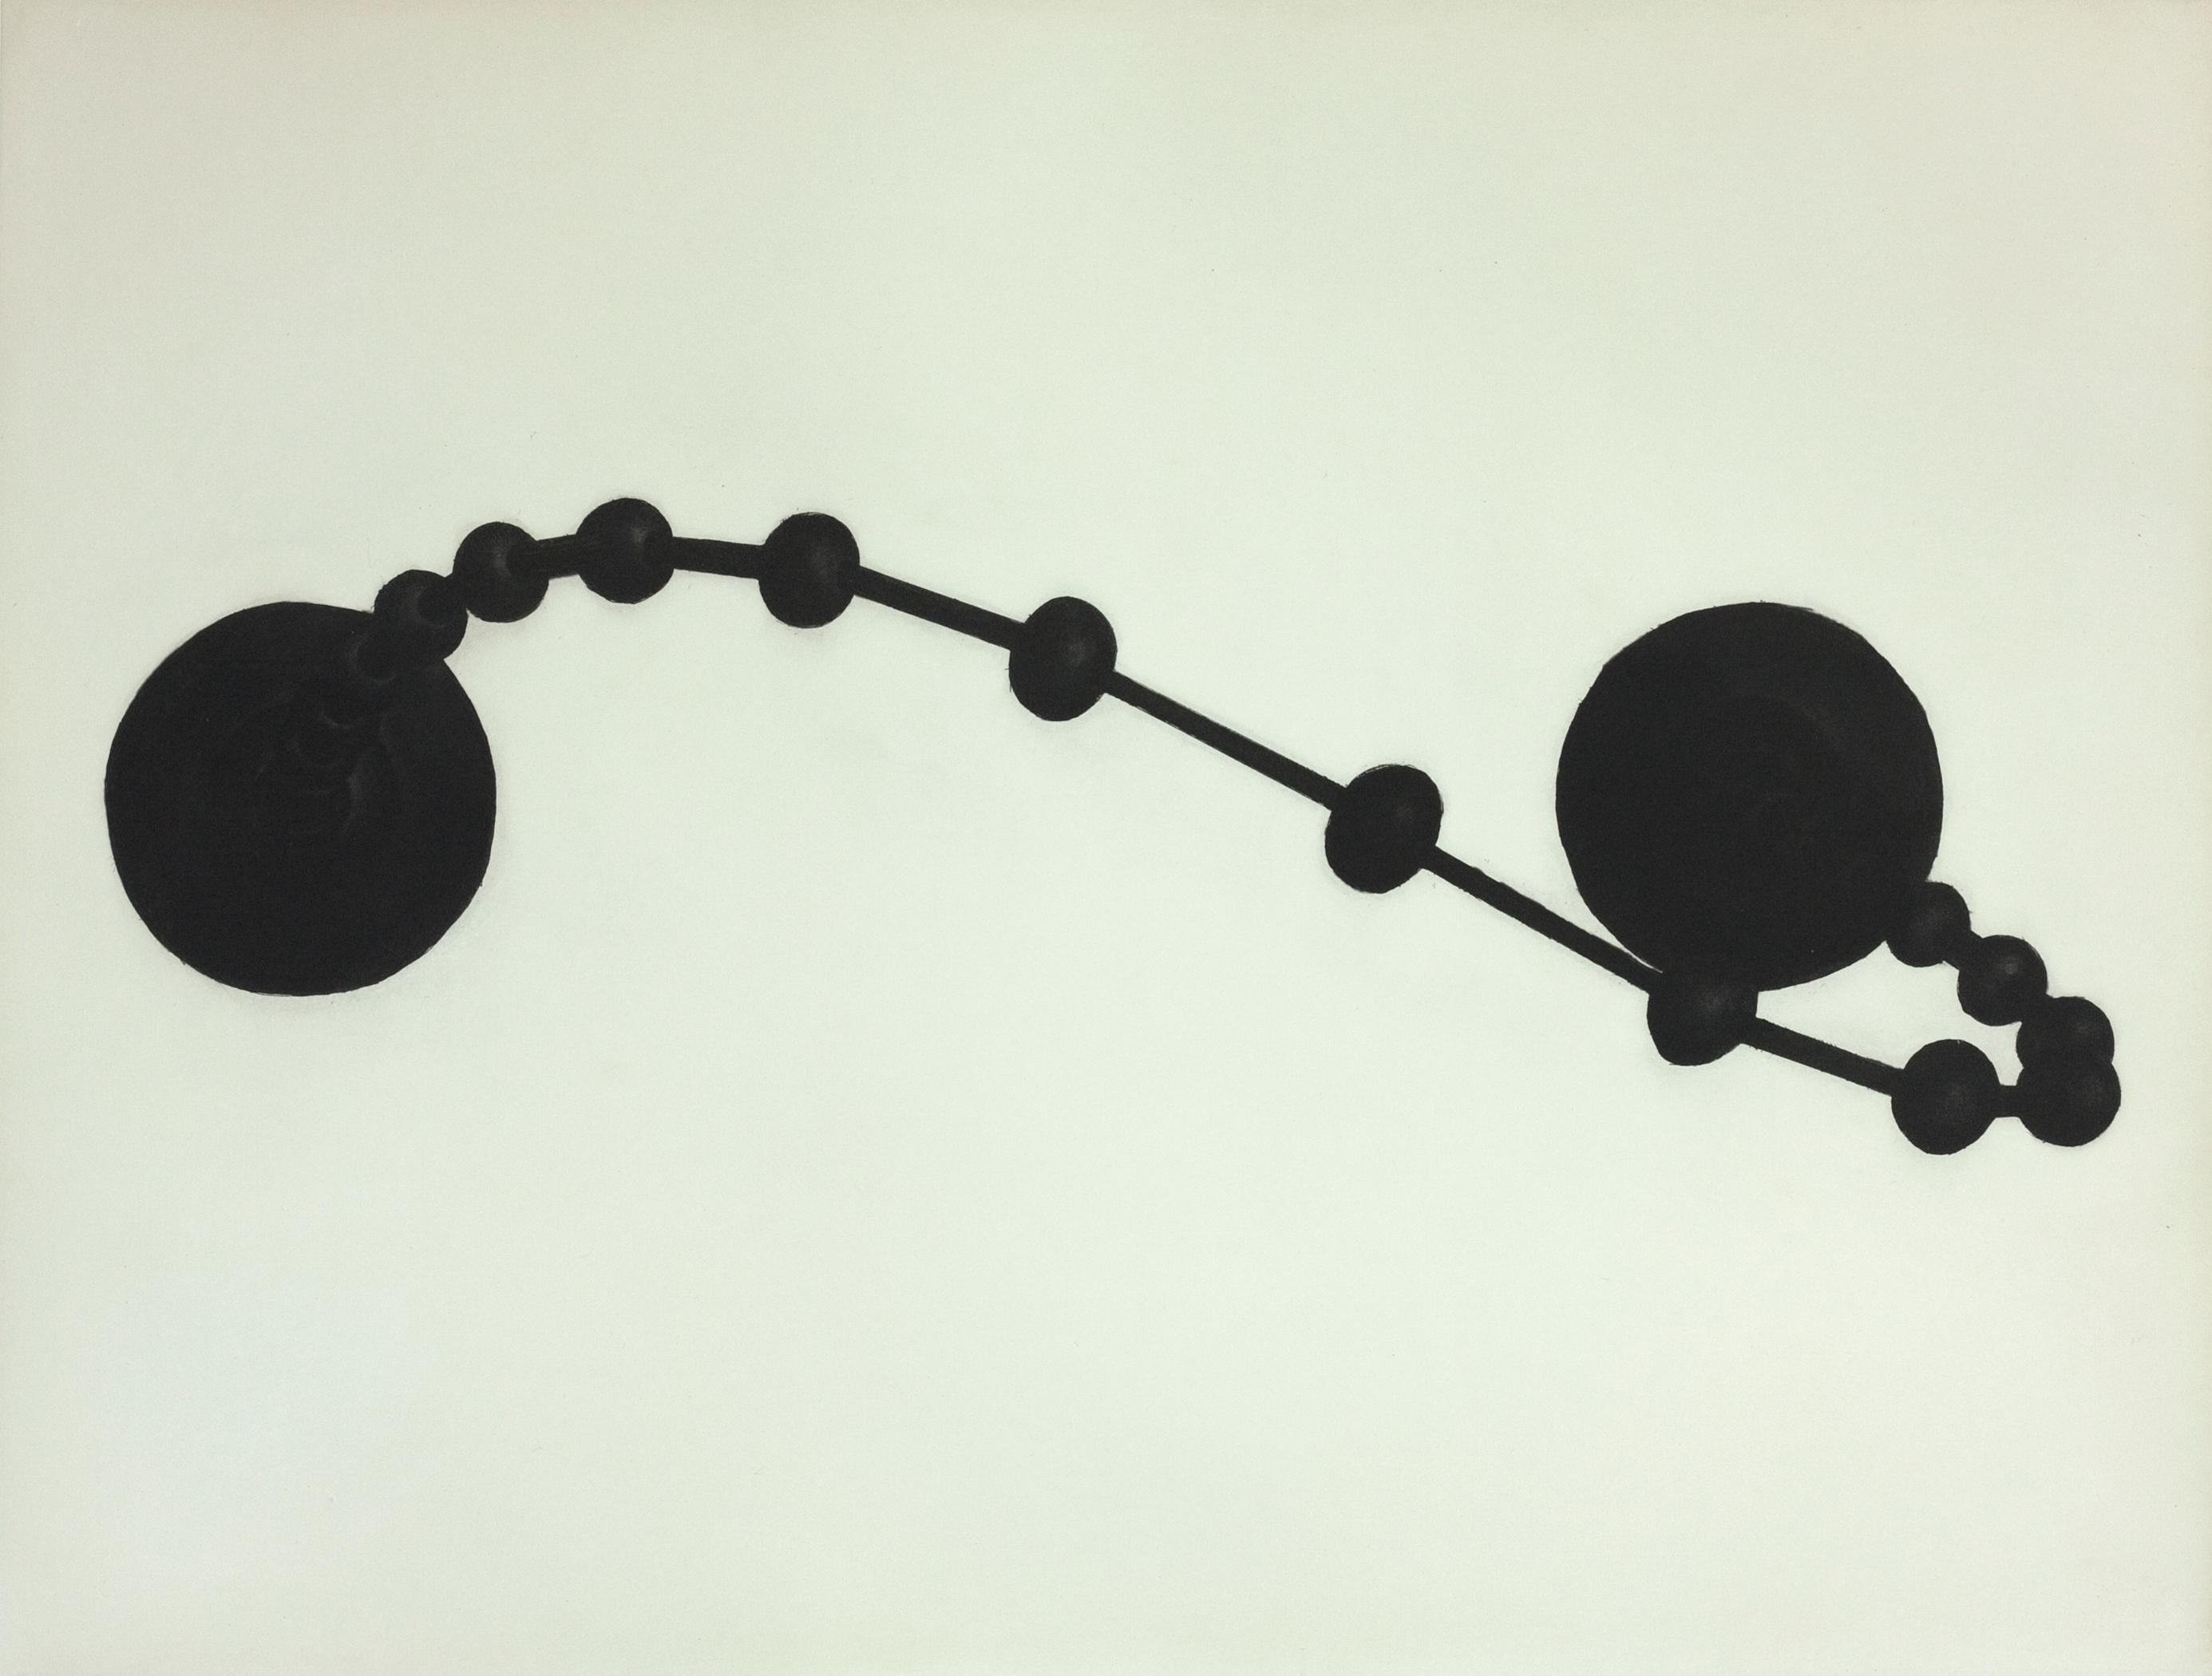 Martin Puryear Abstract Print - From Above (Beijing) 